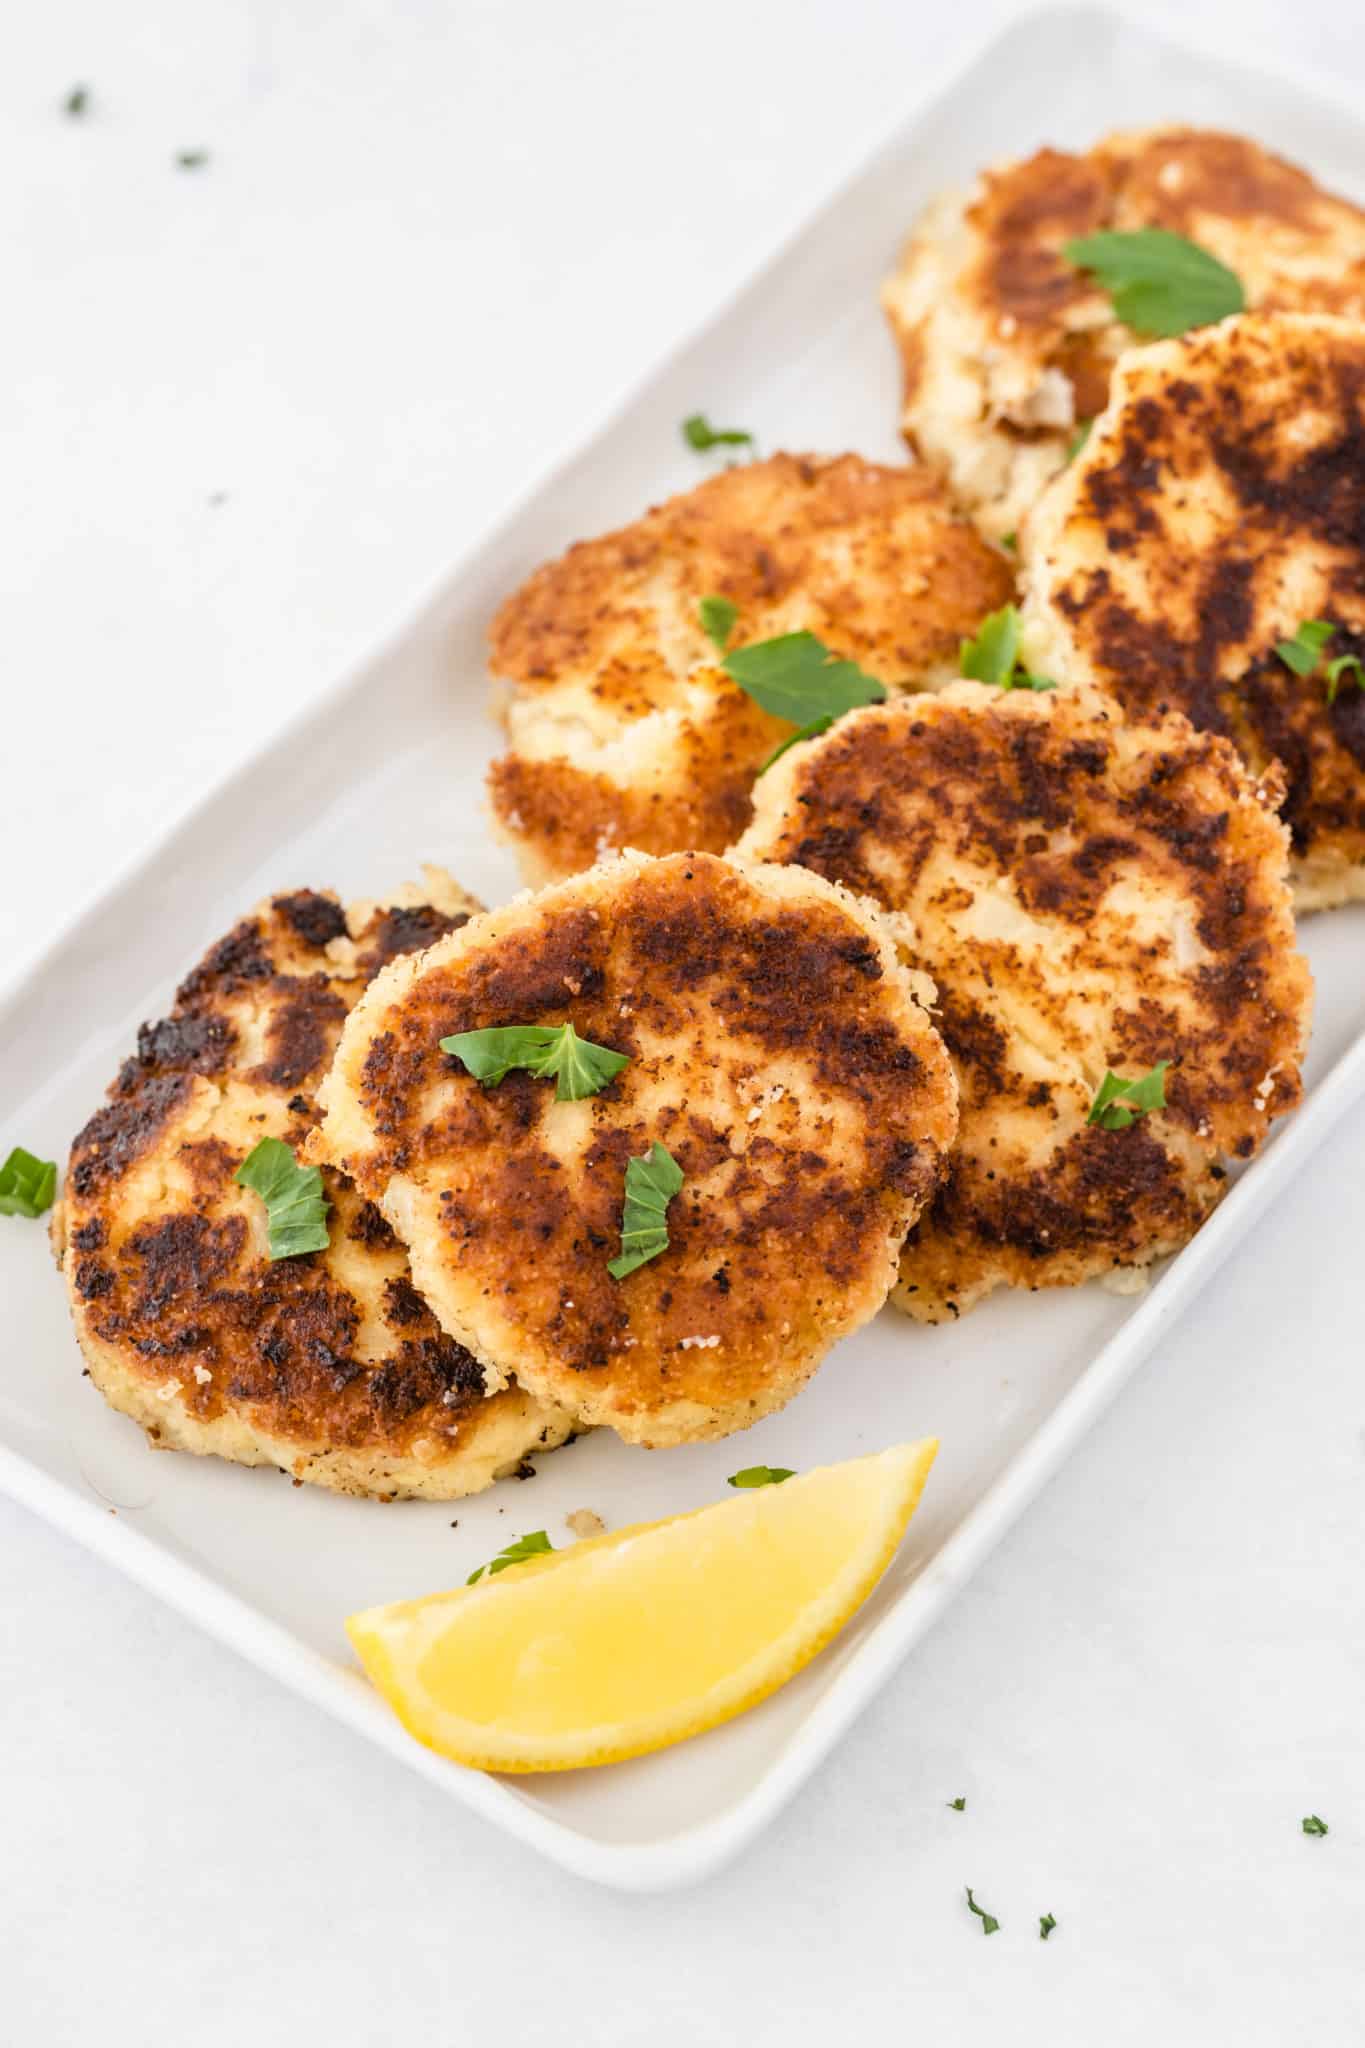 homemade gluten-free crab cakes cooked and served on a white platter.